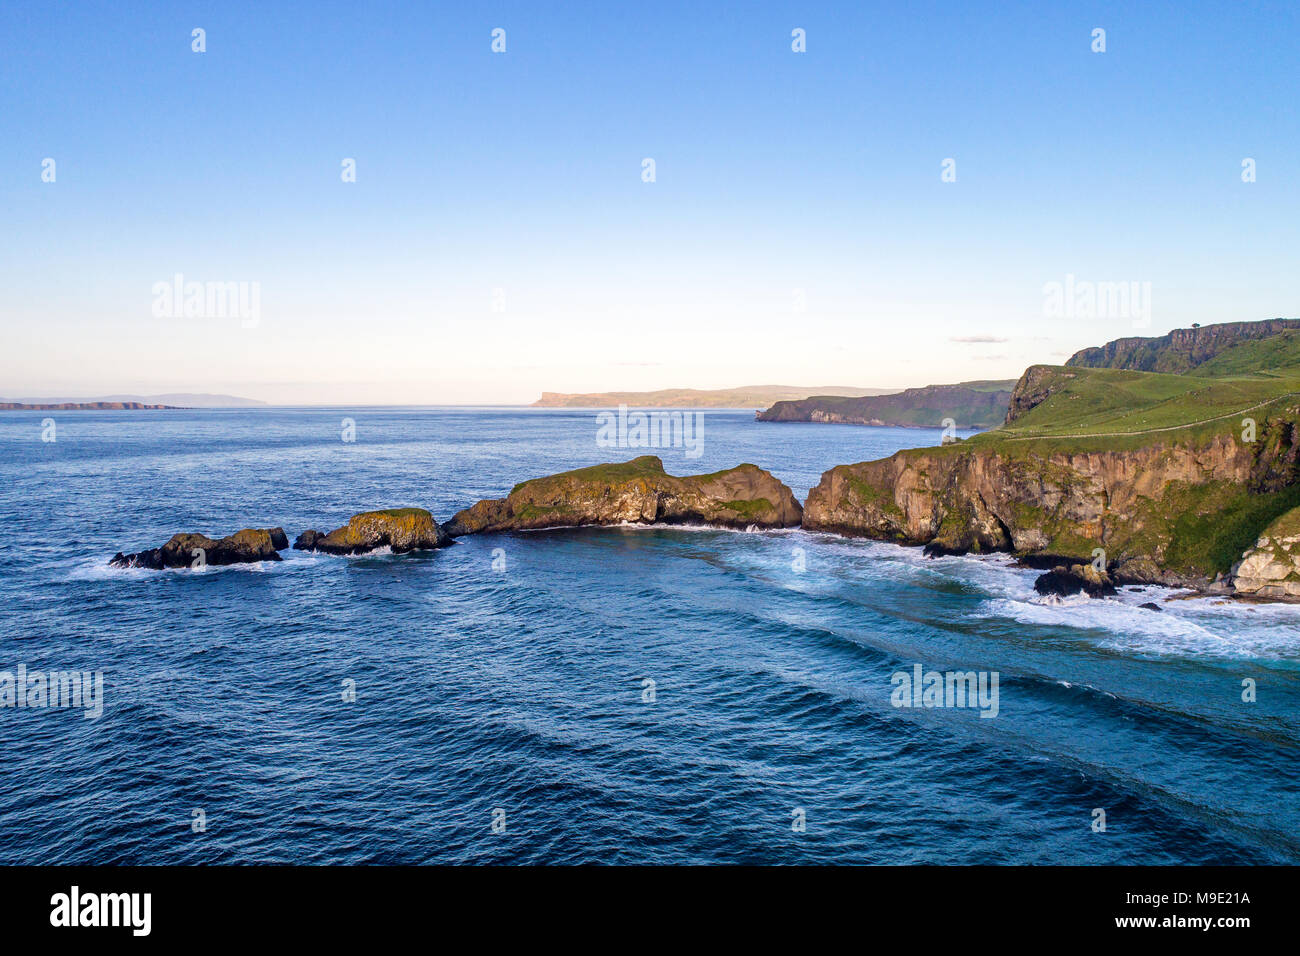 Northern Ireland, UK. Atlantic coast with cliffs and far aerial view of Carrick-a-Rede Rope Bridge in County Antrim Stock Photo